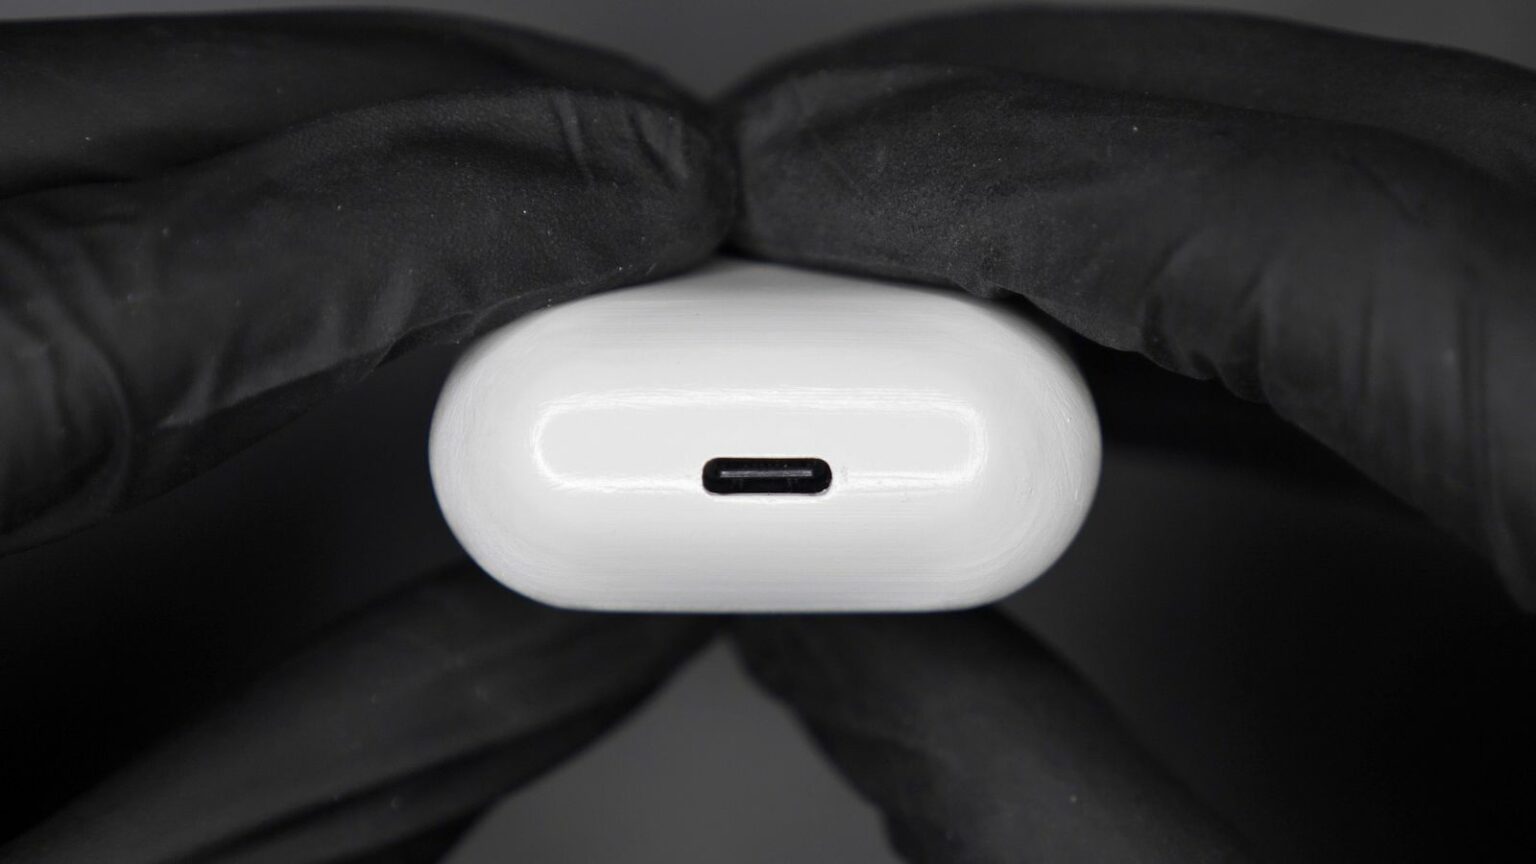 Ken Pillonel put a USB-C port in an AirPods charging case.